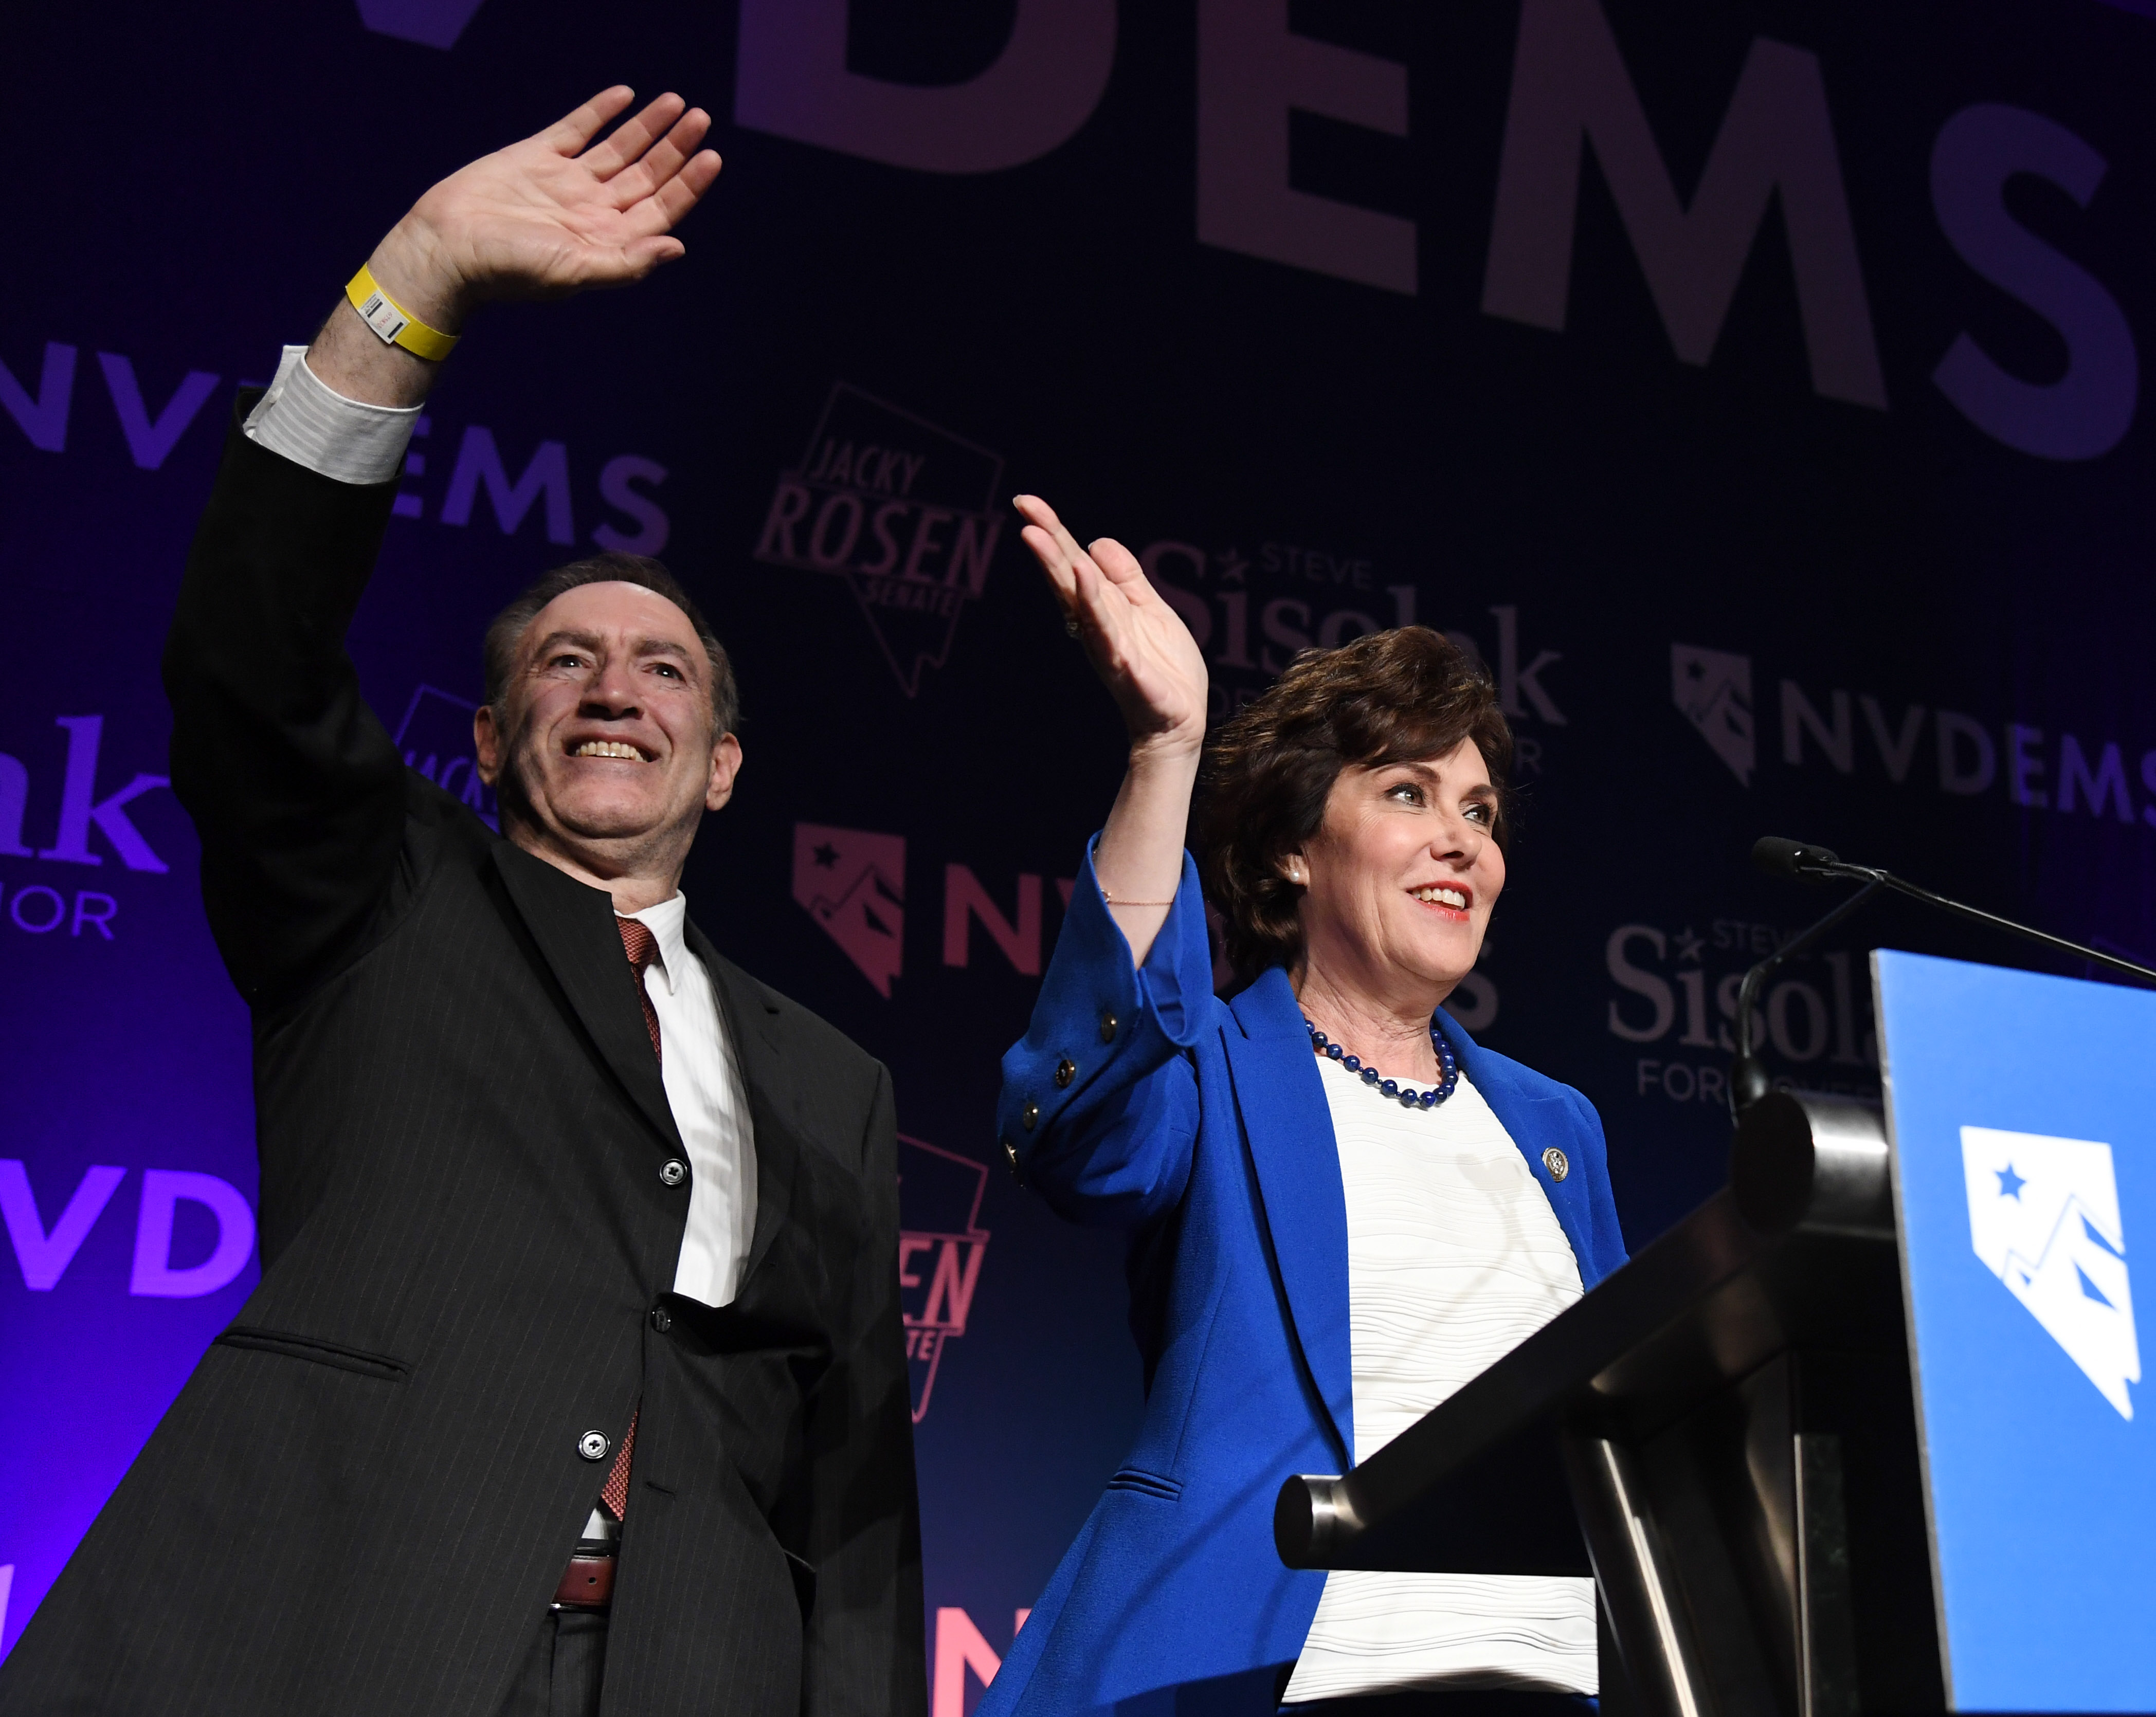 Jacky Rosen And Nevada Democrats Hold Election Night Event In Las Vegas